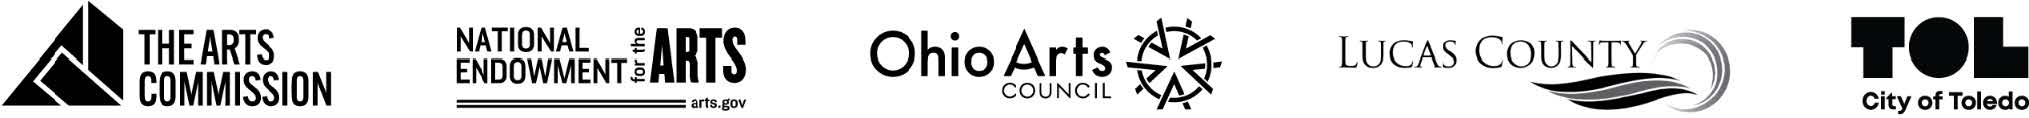 Logos of ARPA local partners: The Arts Commission, Lucas County Commissioners and City of Toledo with additional support from the National Endowment for the Arts and Ohio Arts Council